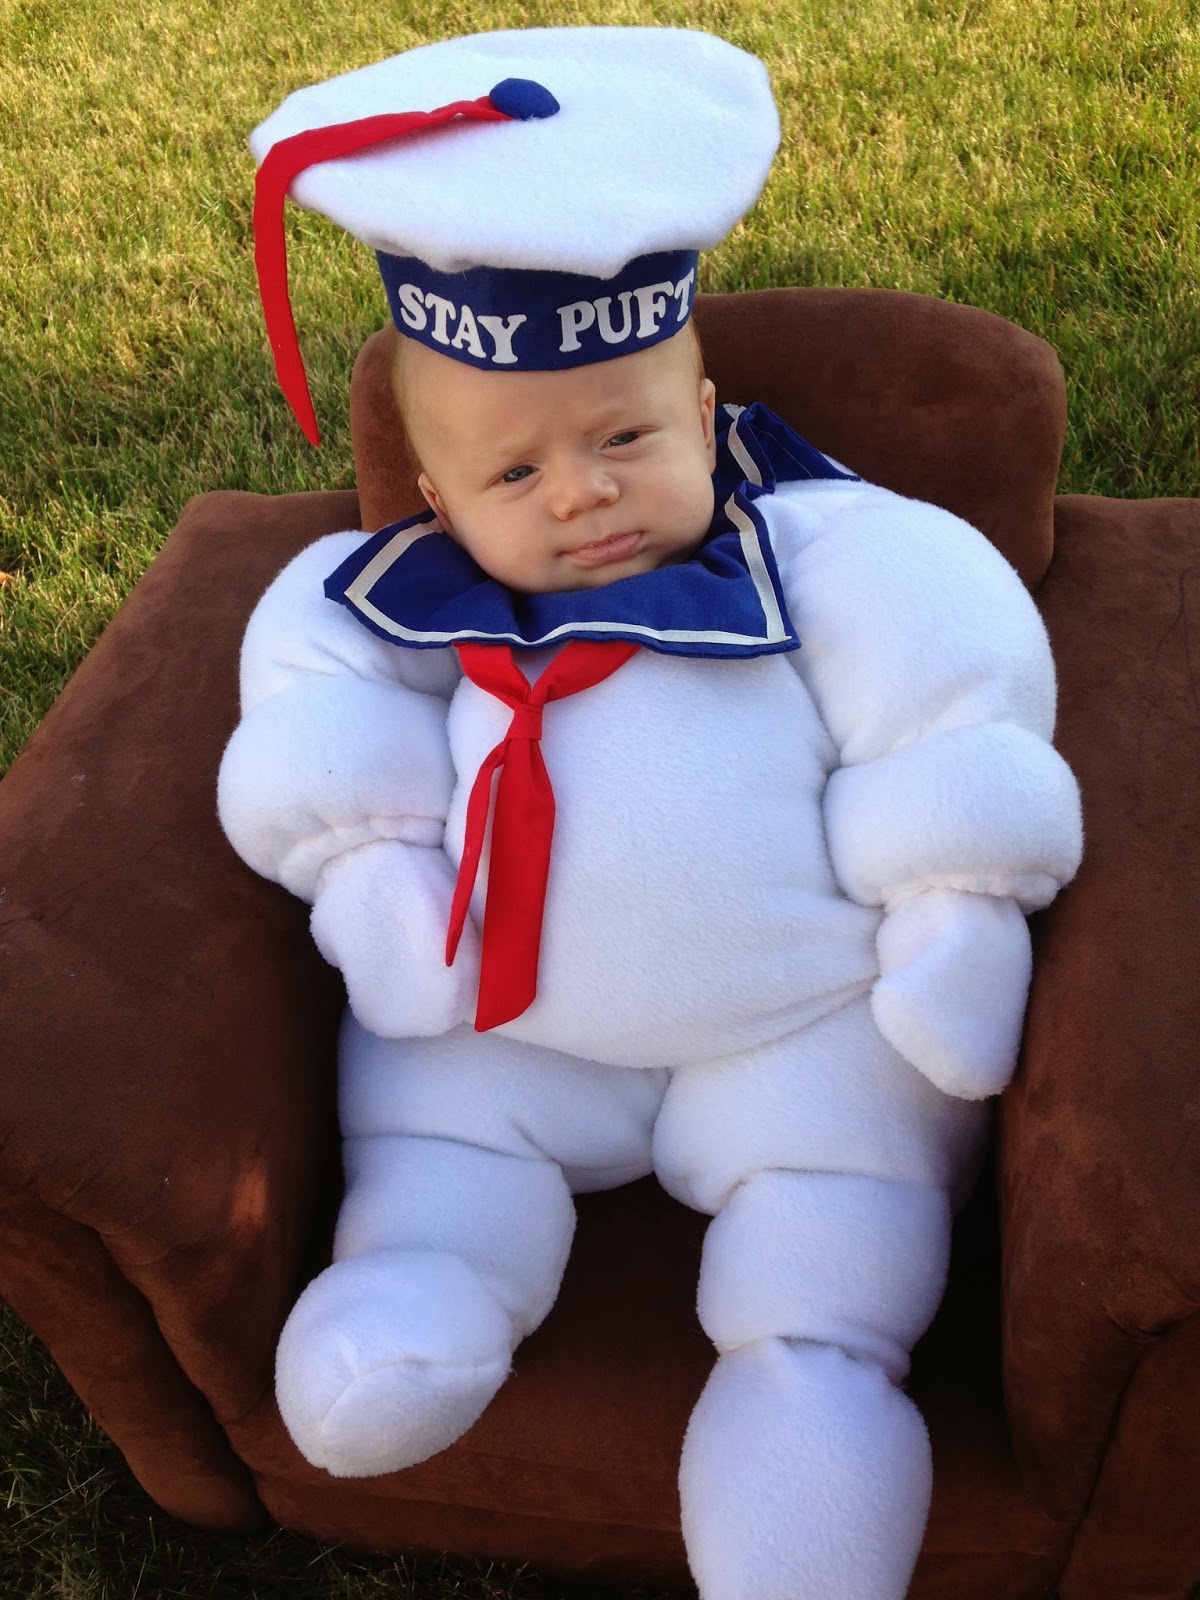 Handmade by Linds...Introducing the offspring: Handmade infant Staypuft ...